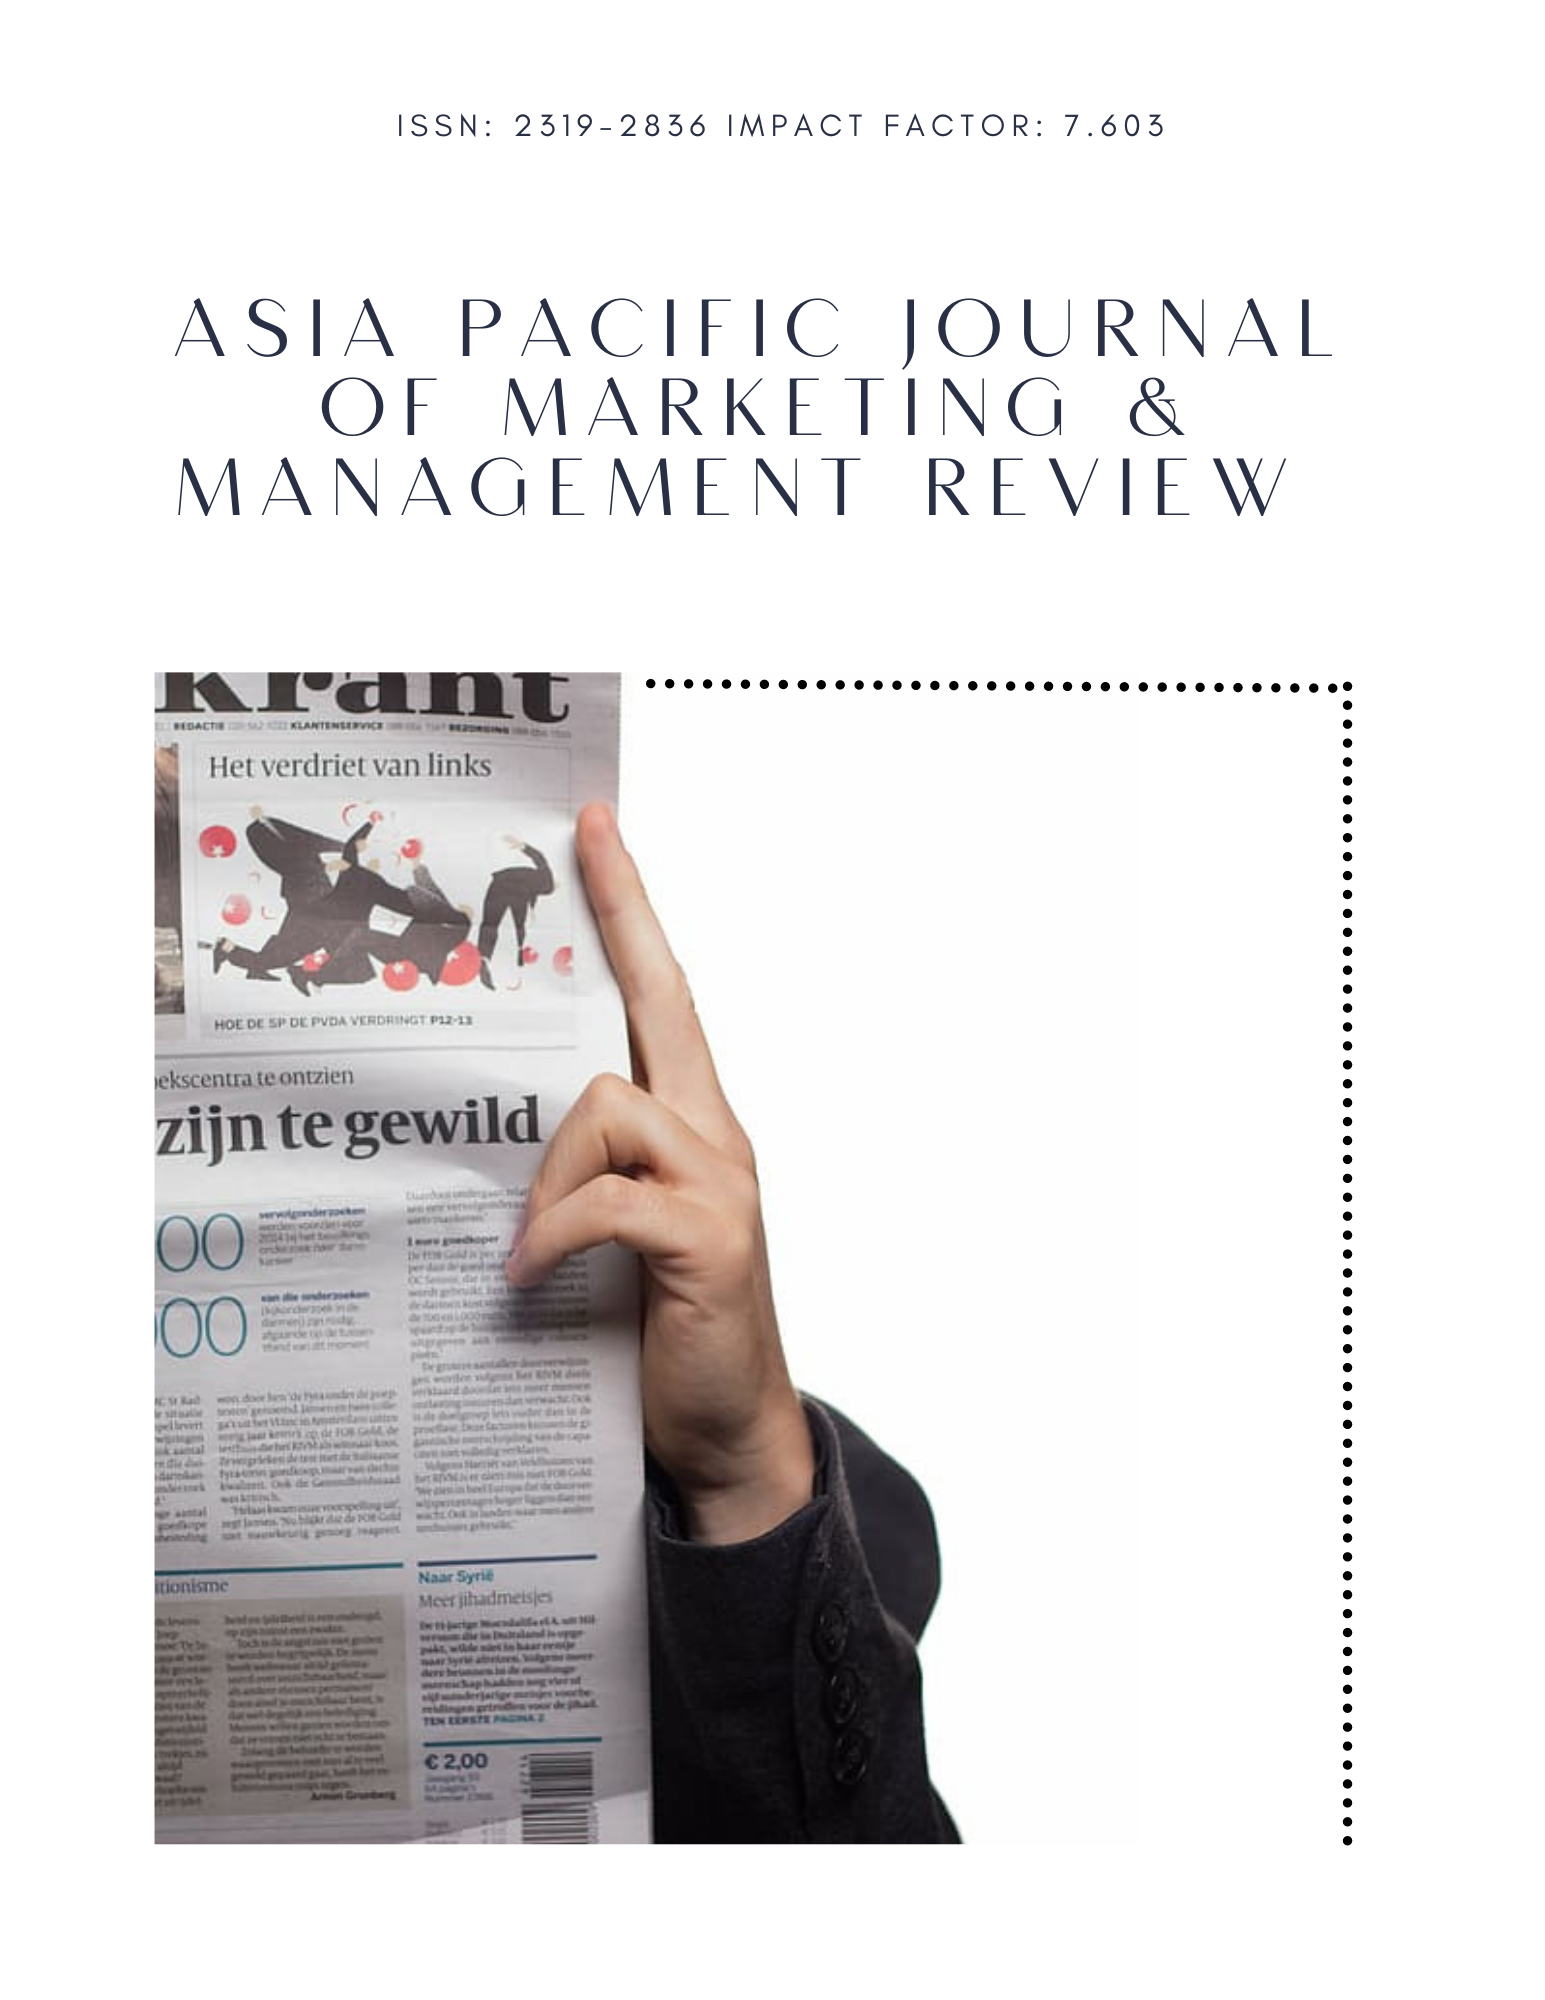 					View Vol. 11 No. 04 (2022): ASIA PACIFIC JOURNAL OF MARKETING & MANAGEMENT REVIEW
				